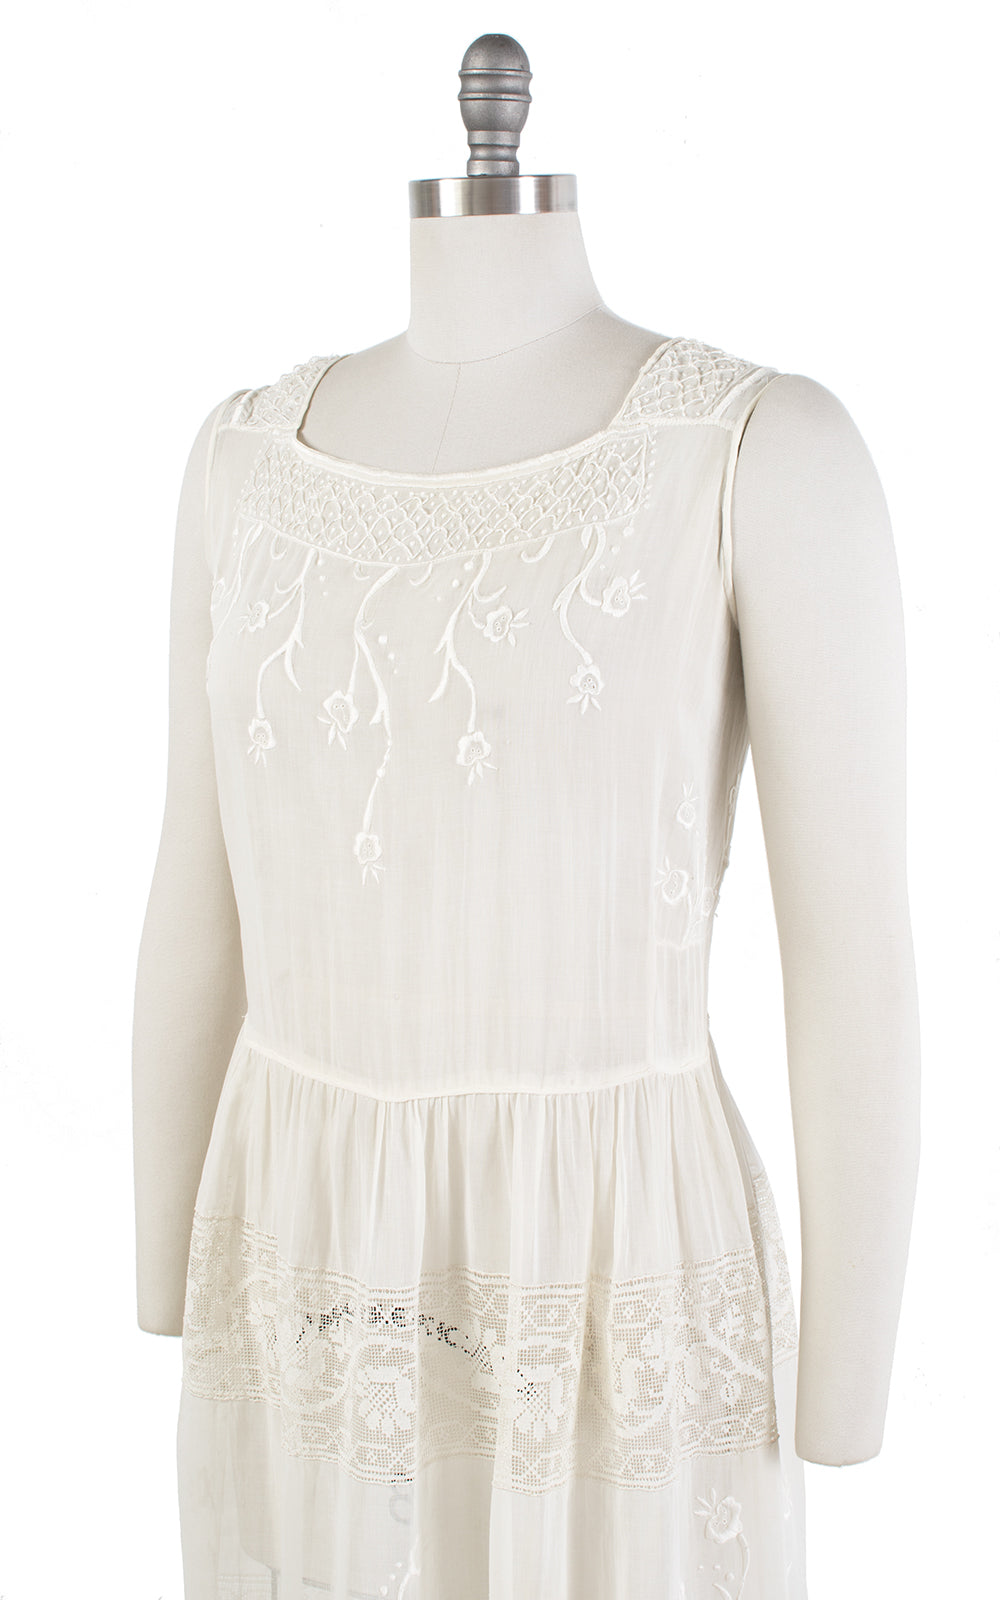 1920s Floral Embroidered Cream Sheer Cotton Voile Sundress